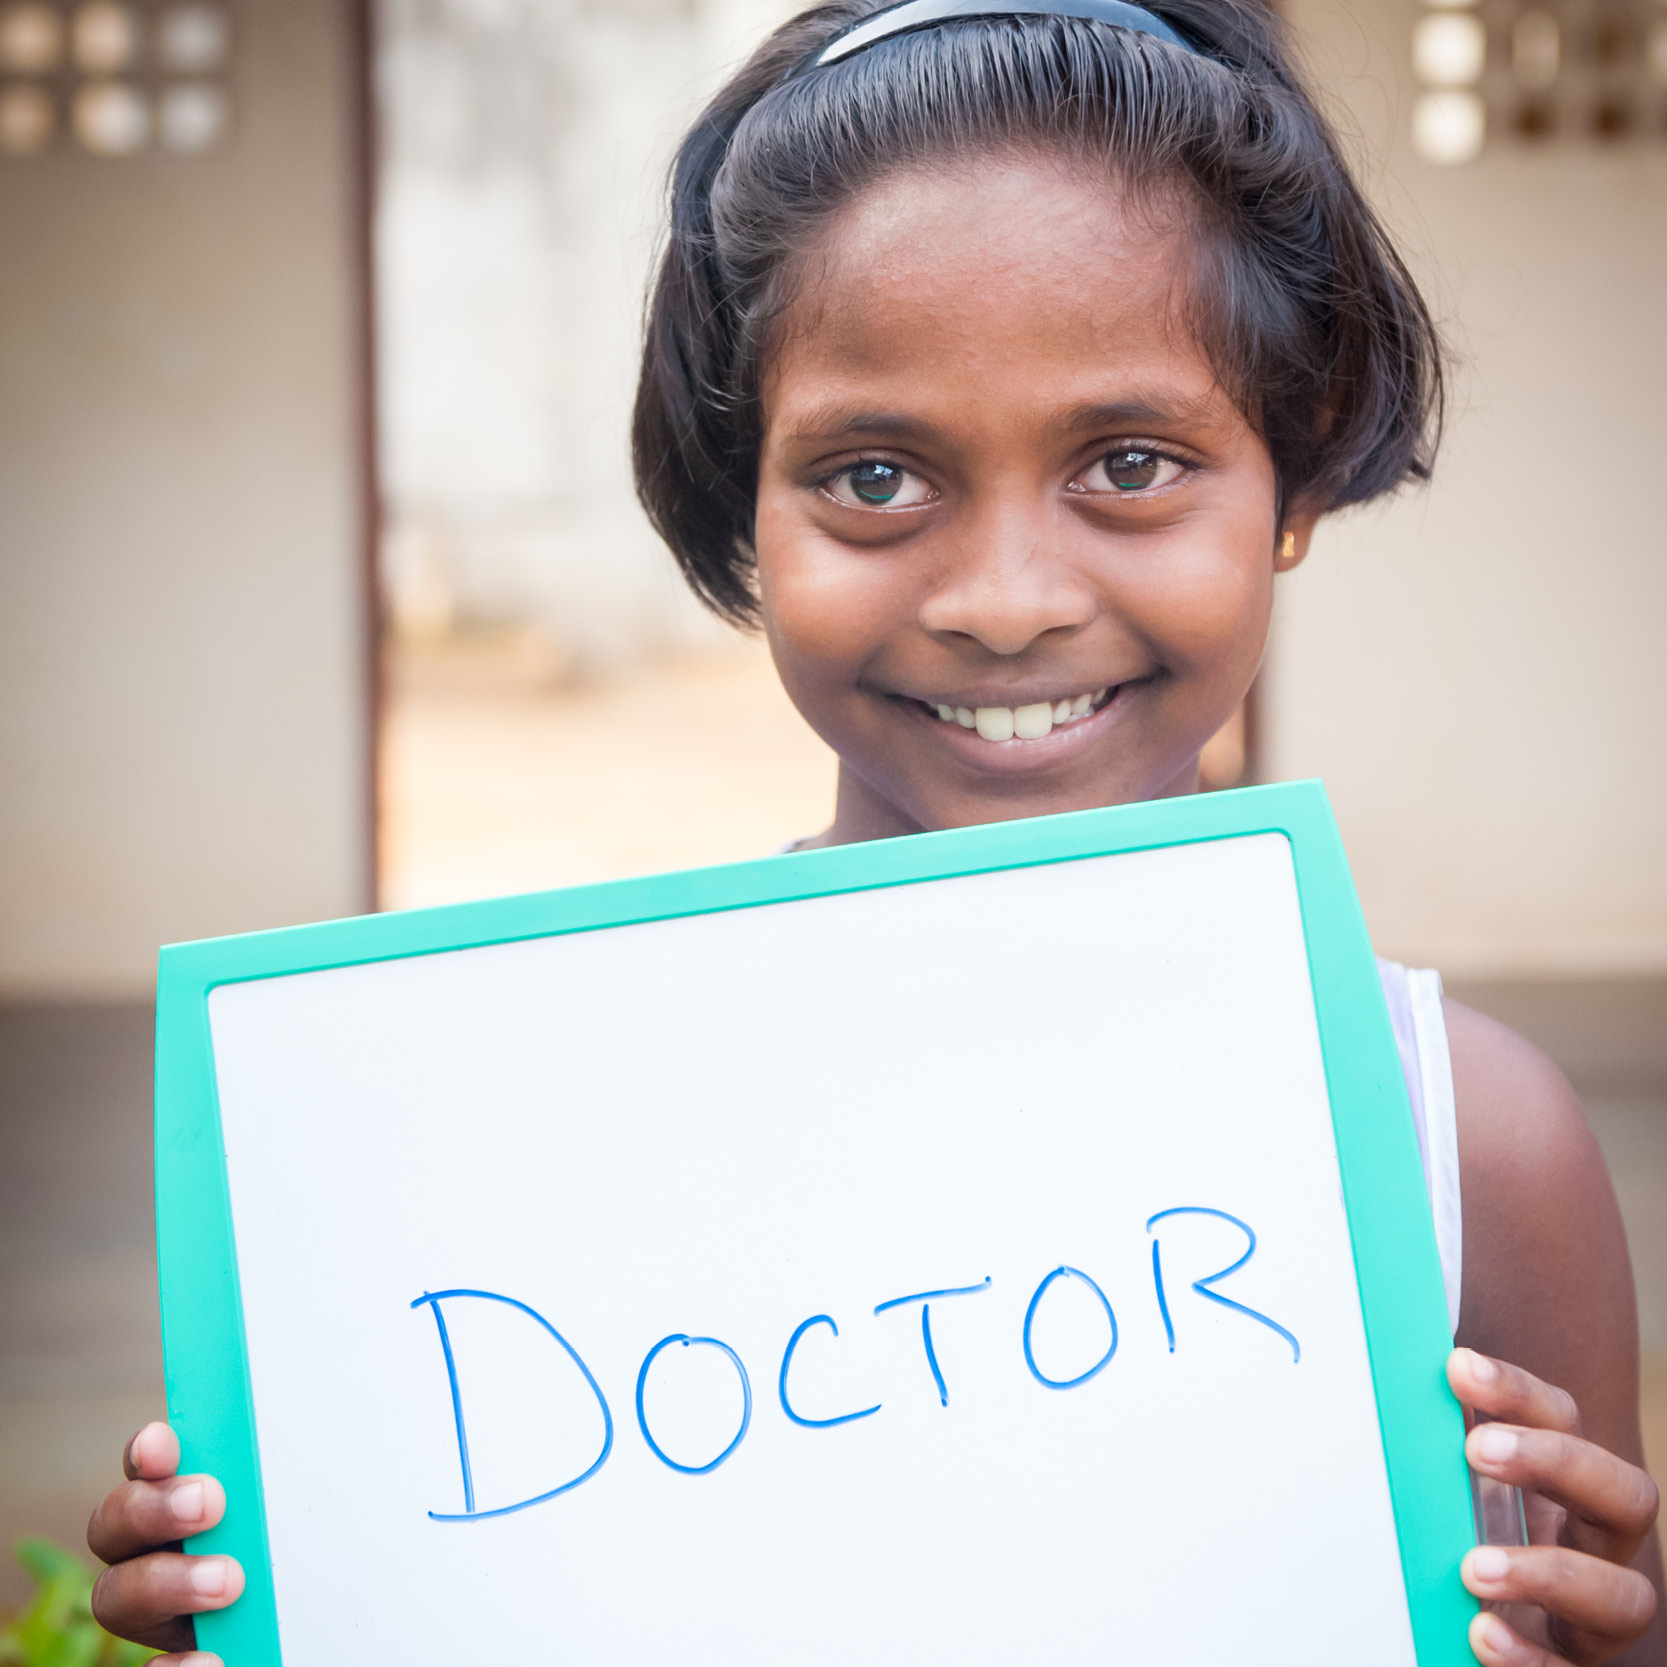 Photo of girl child from Sri Lanka holding up a sign that says she wants to be a doctor